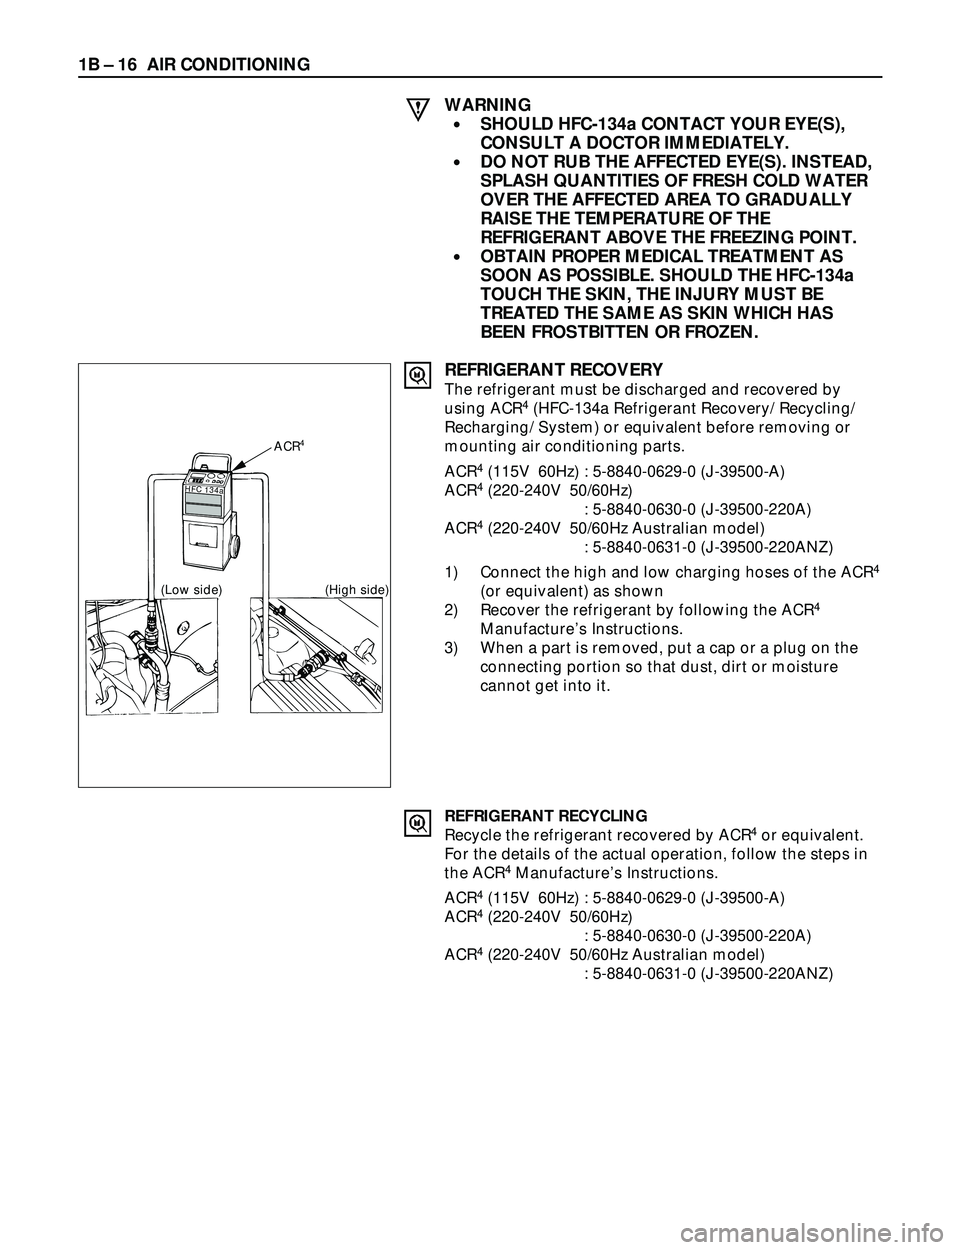 ISUZU TROOPER 1998  Service Repair Manual 1B Ð 16 AIR CONDITIONING
WARNING
·SHOULD HFC-134a CONTACT YOUR EYE(S),
CONSULT A DOCTOR IMMEDIATELY.
·DO NOT RUB THE AFFECTED EYE(S). INSTEAD,
SPLASH QUANTITIES OF FRESH COLD WATER
OVER THE AFFECTE